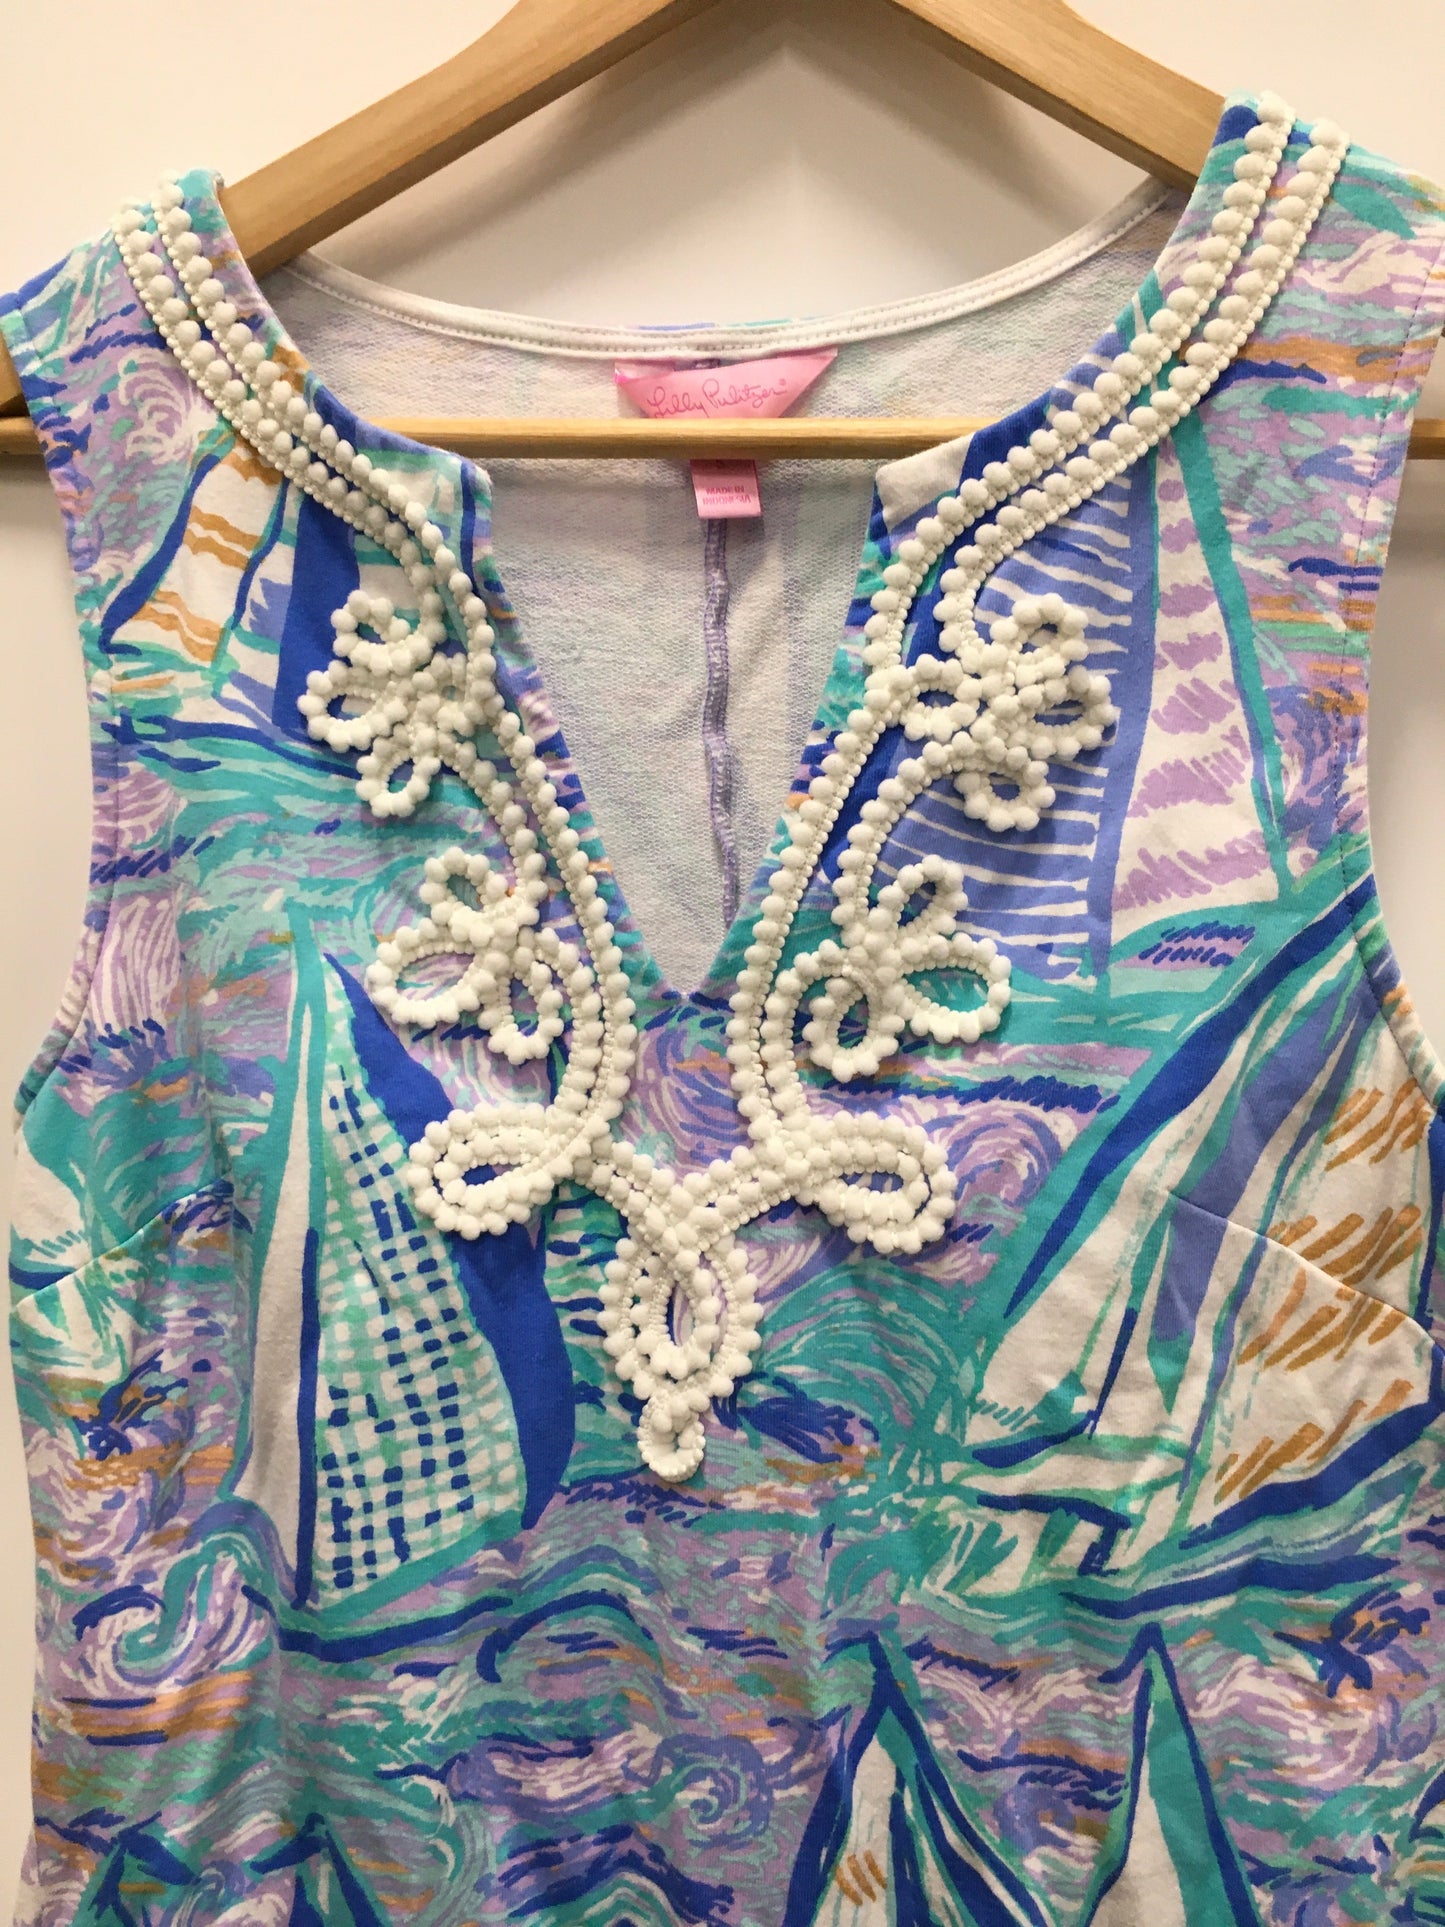 Blue Dress Casual Midi Lilly Pulitzer, Size S